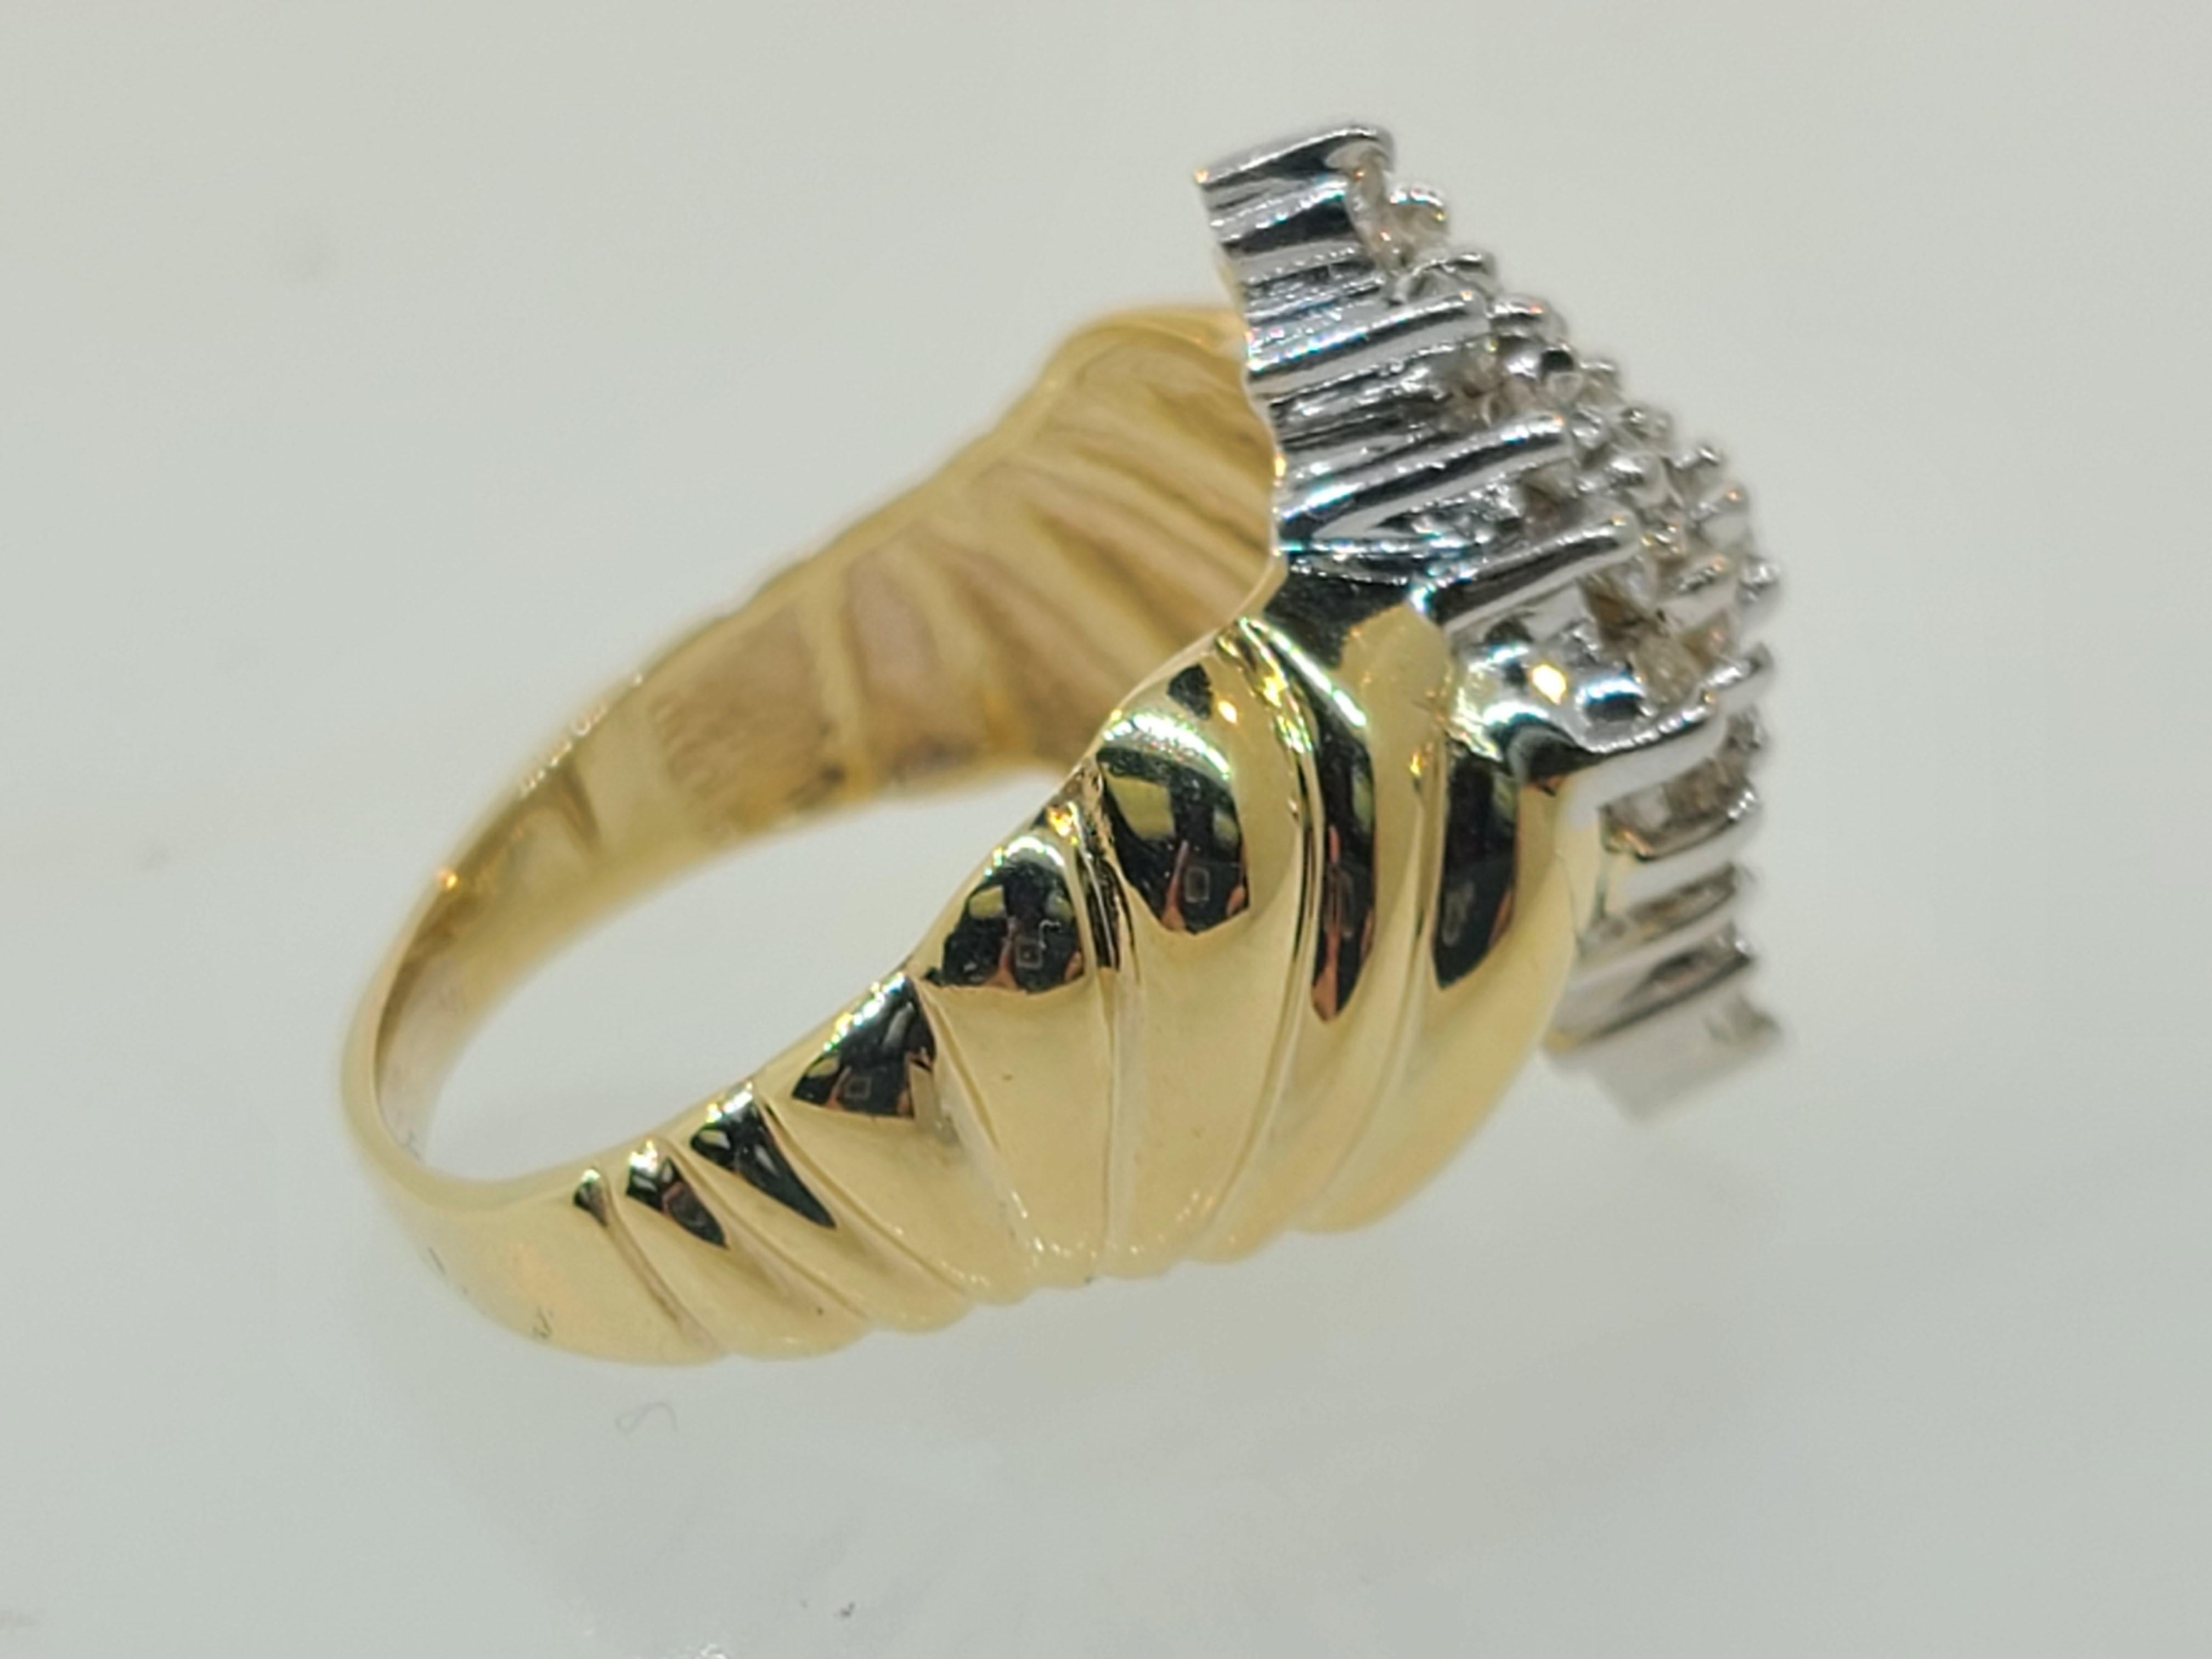 This wonderful two-toned vintage cocktail ring has 25 small diamonds in a marquise pattern comprise the head of this wonderful ring. The white luster of the rhodium plated head accents the diamonds perfectly and is complimented by the yellow gold